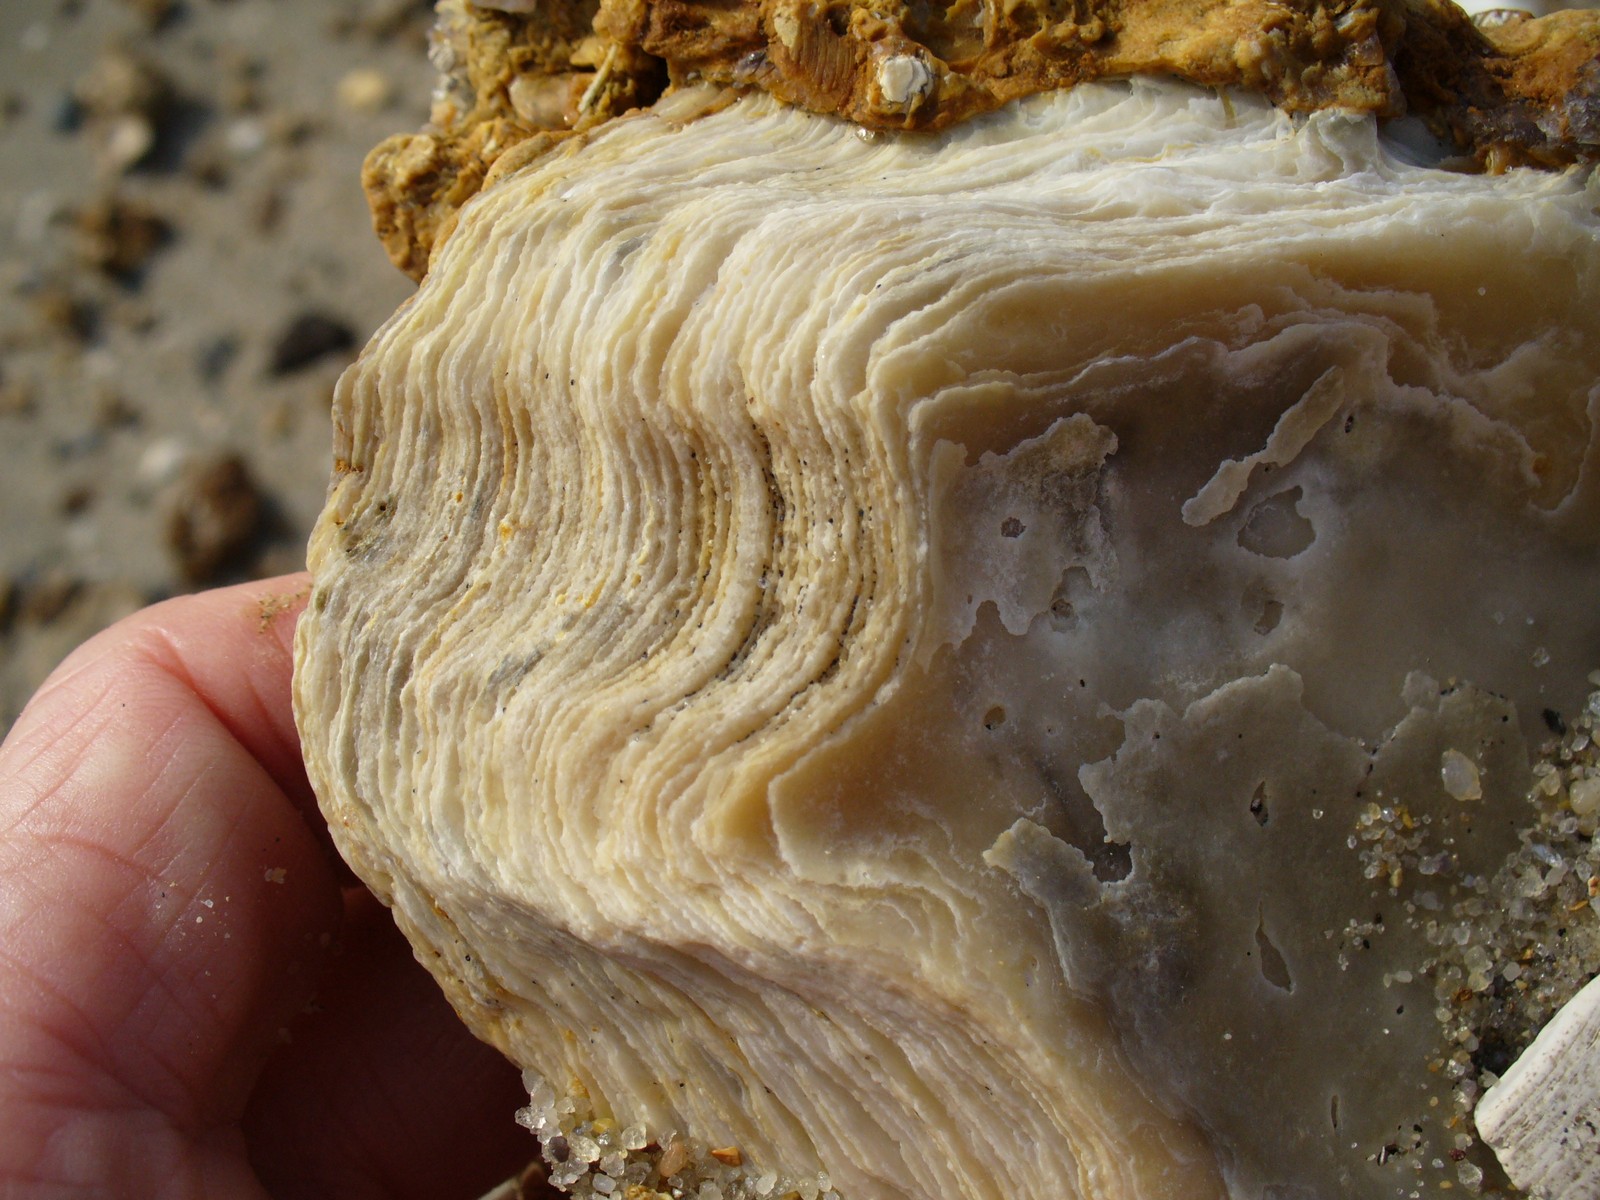 Layers in an oyster shell